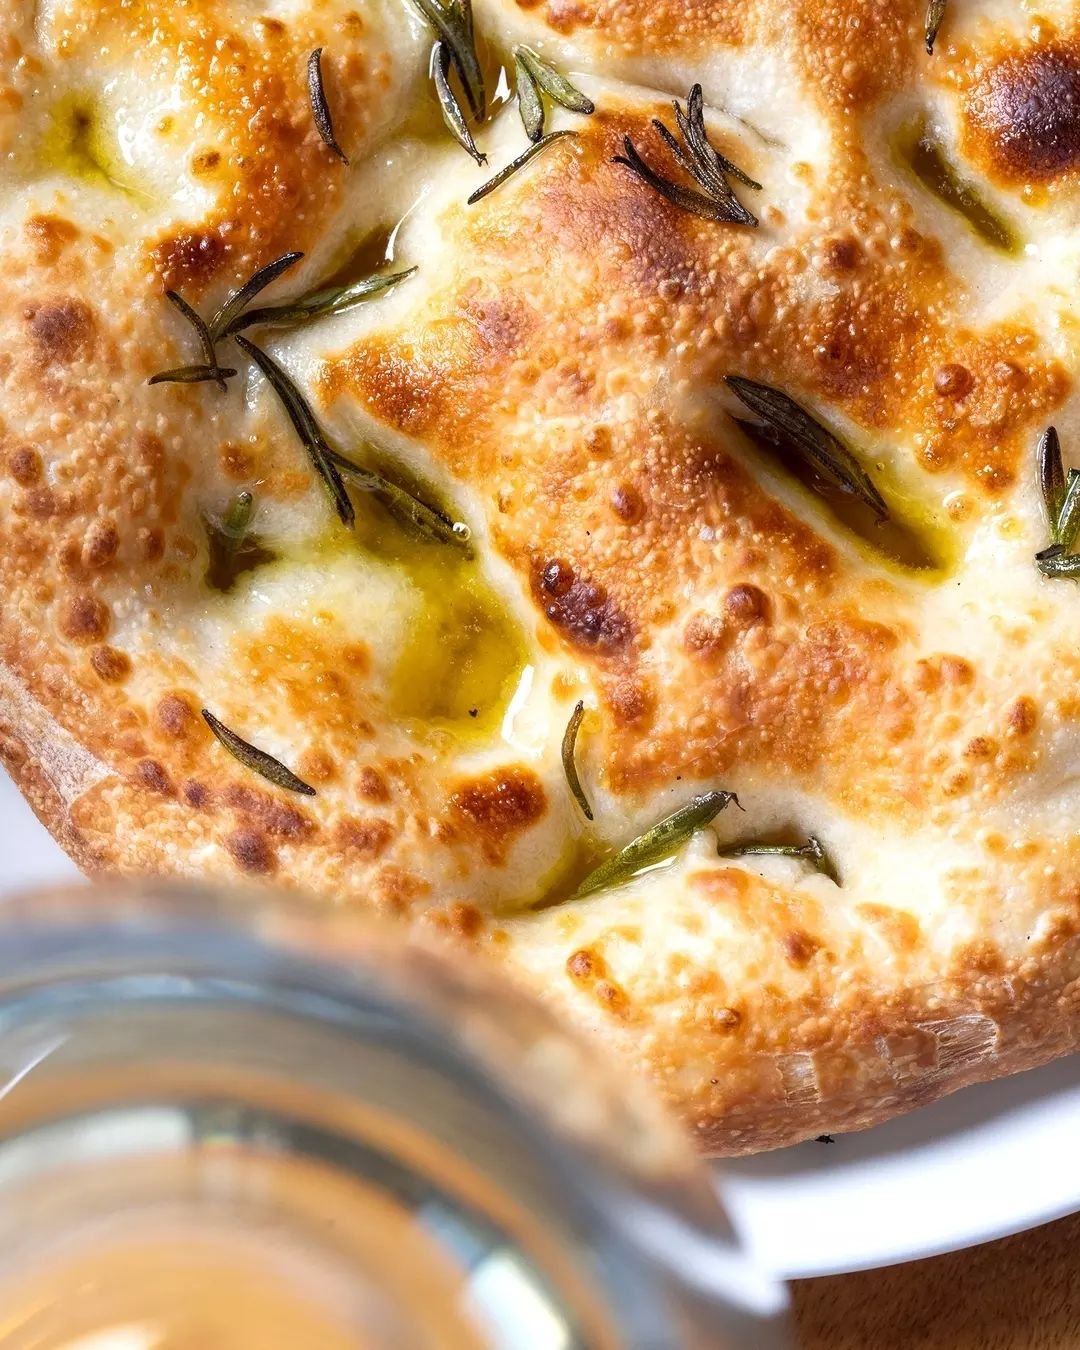 Woodfired focaccia with rosemary, Sicilian sea salt and olive oil. Mangia!